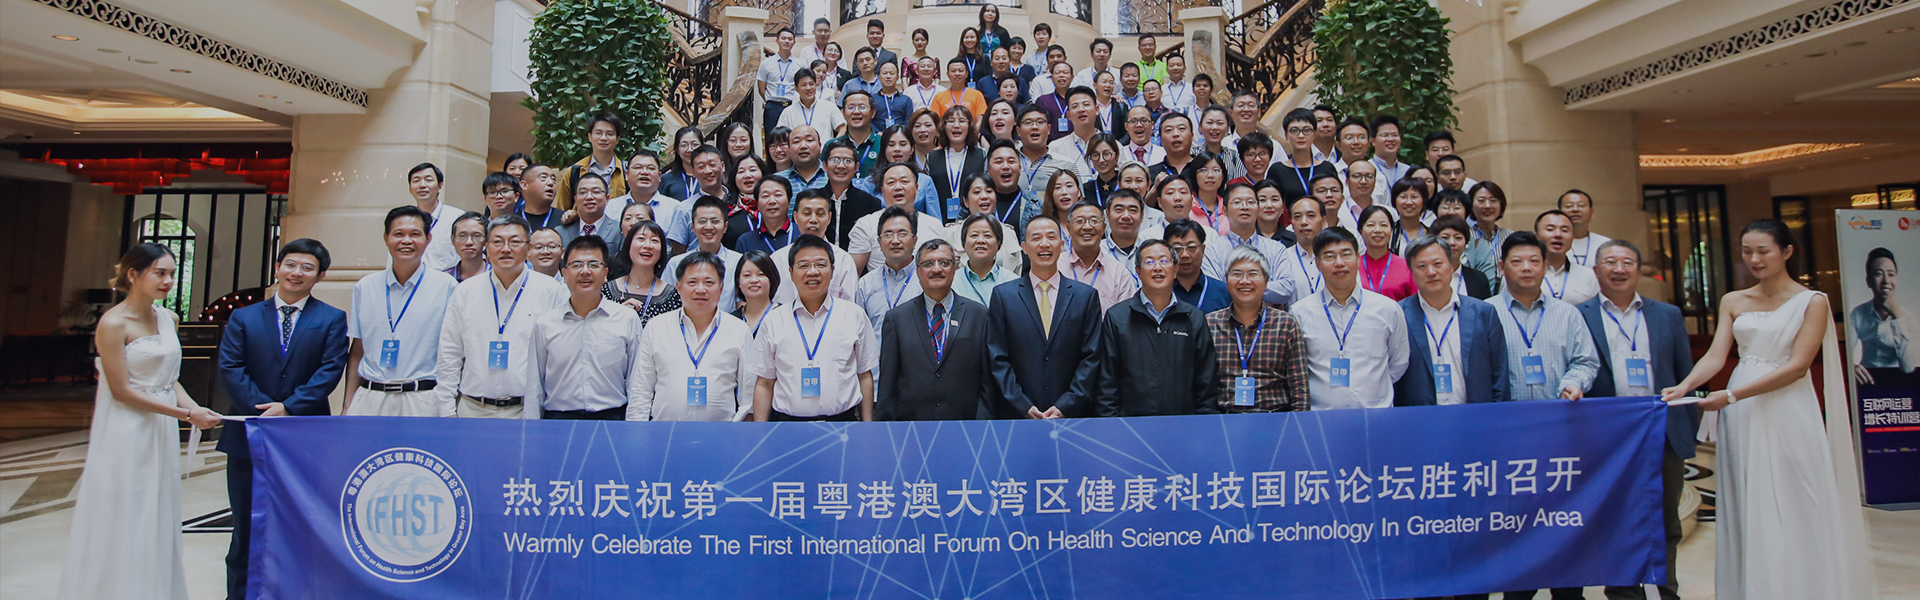 The 1st Guangdong-Hong Kong-Macao Greater Bay Area Health Technology International Forum Held in Shenzhen